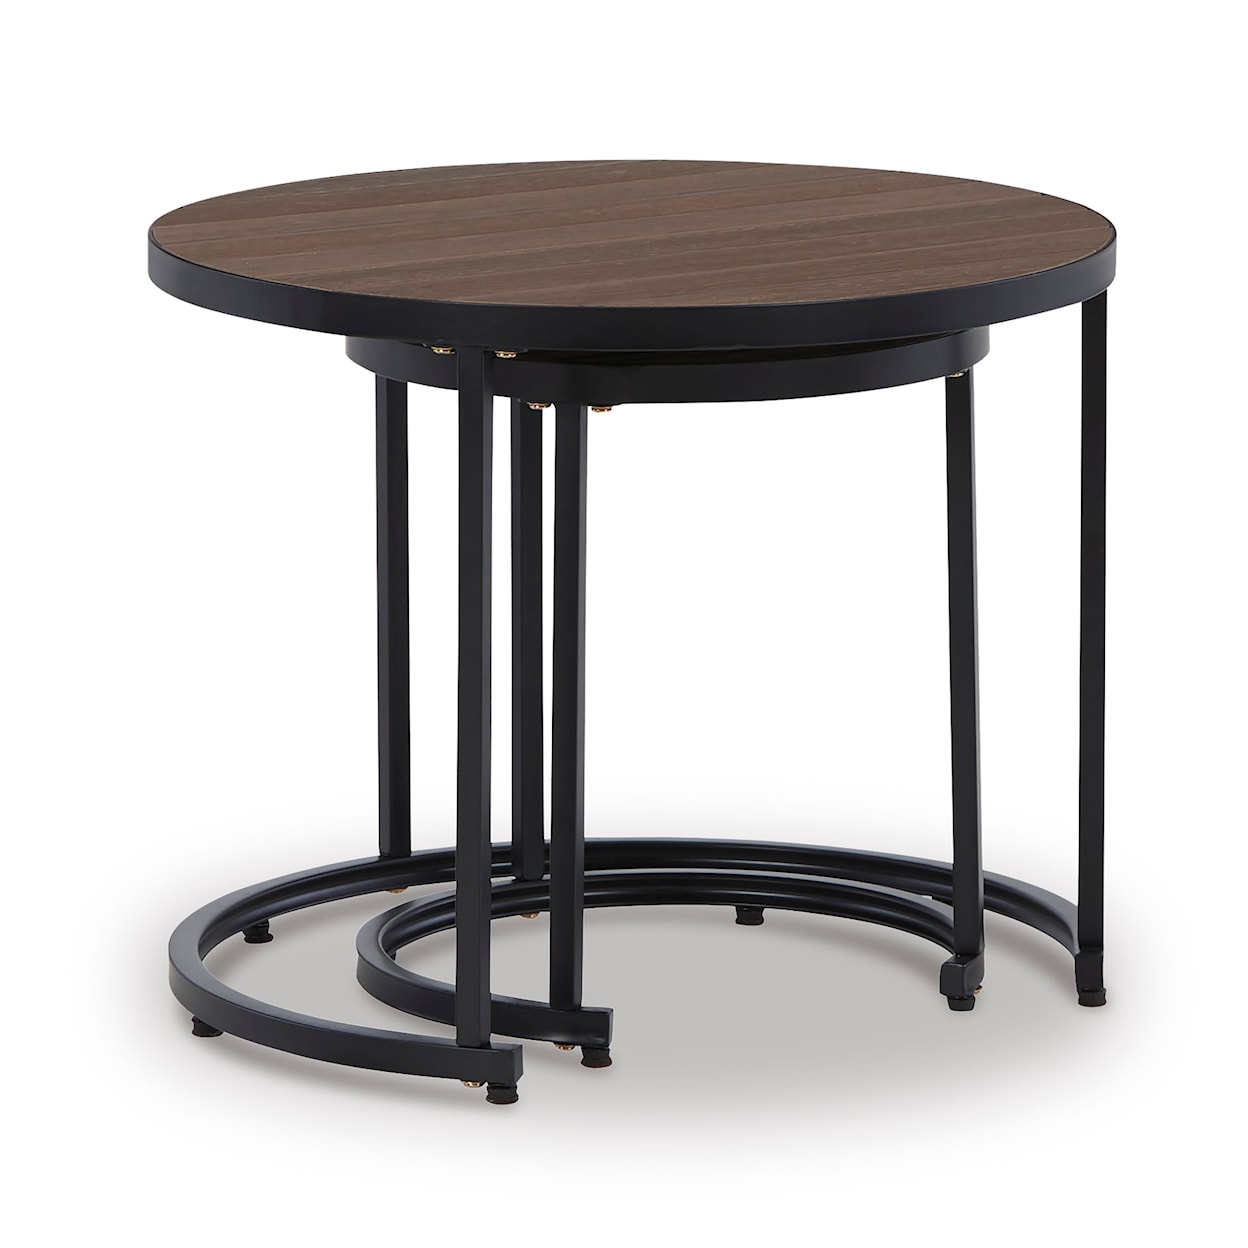 Signature Design by Ashley Ayla Outdoor Nesting End Tables (Set of 2)